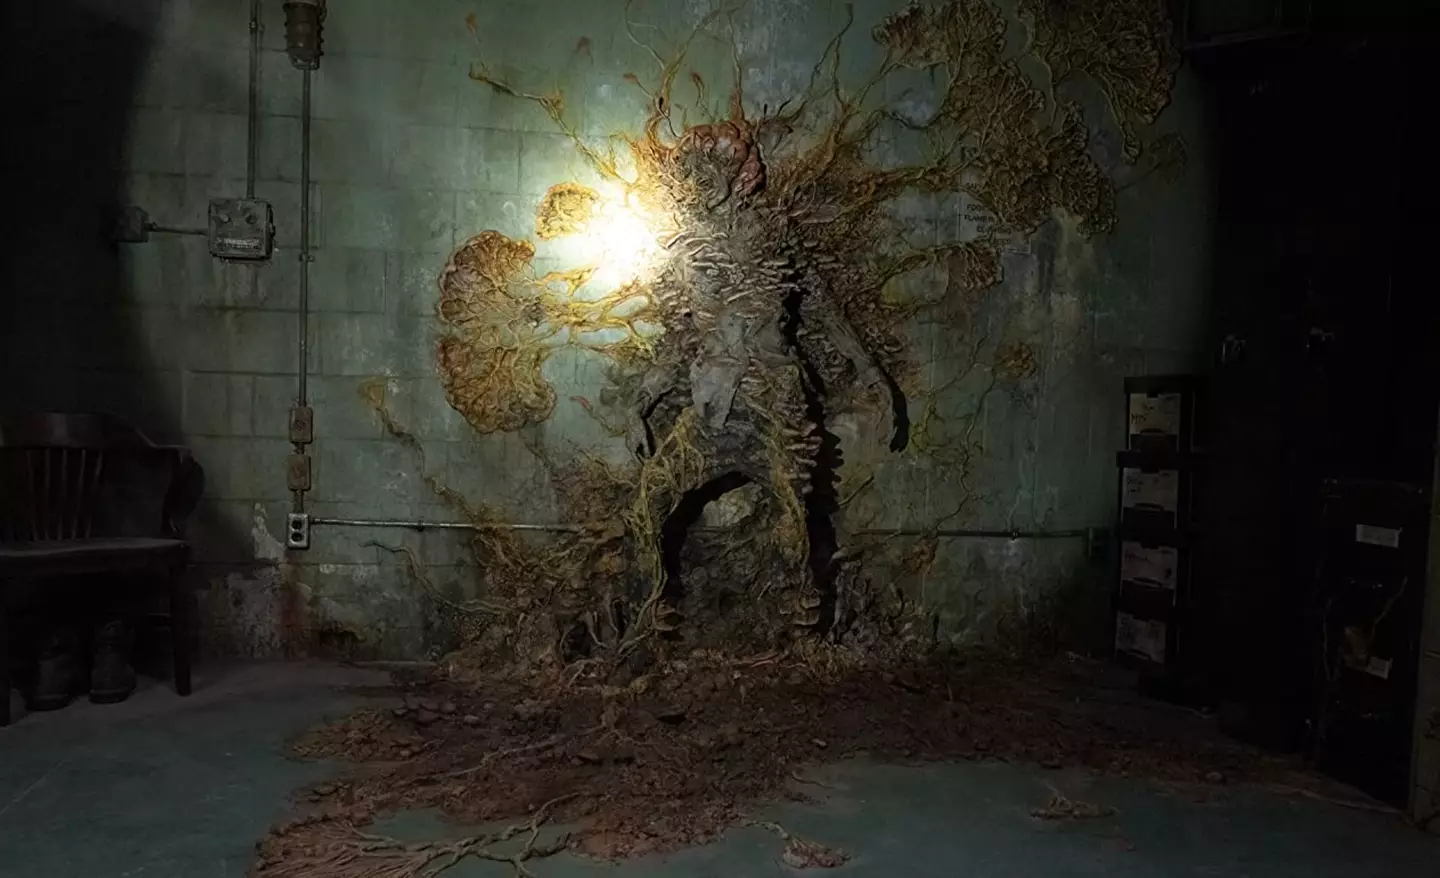 The spreading fungus is being described as 'The Last of Us Season 2' by people on Twitter. Credit:The Last of Us/IMDb